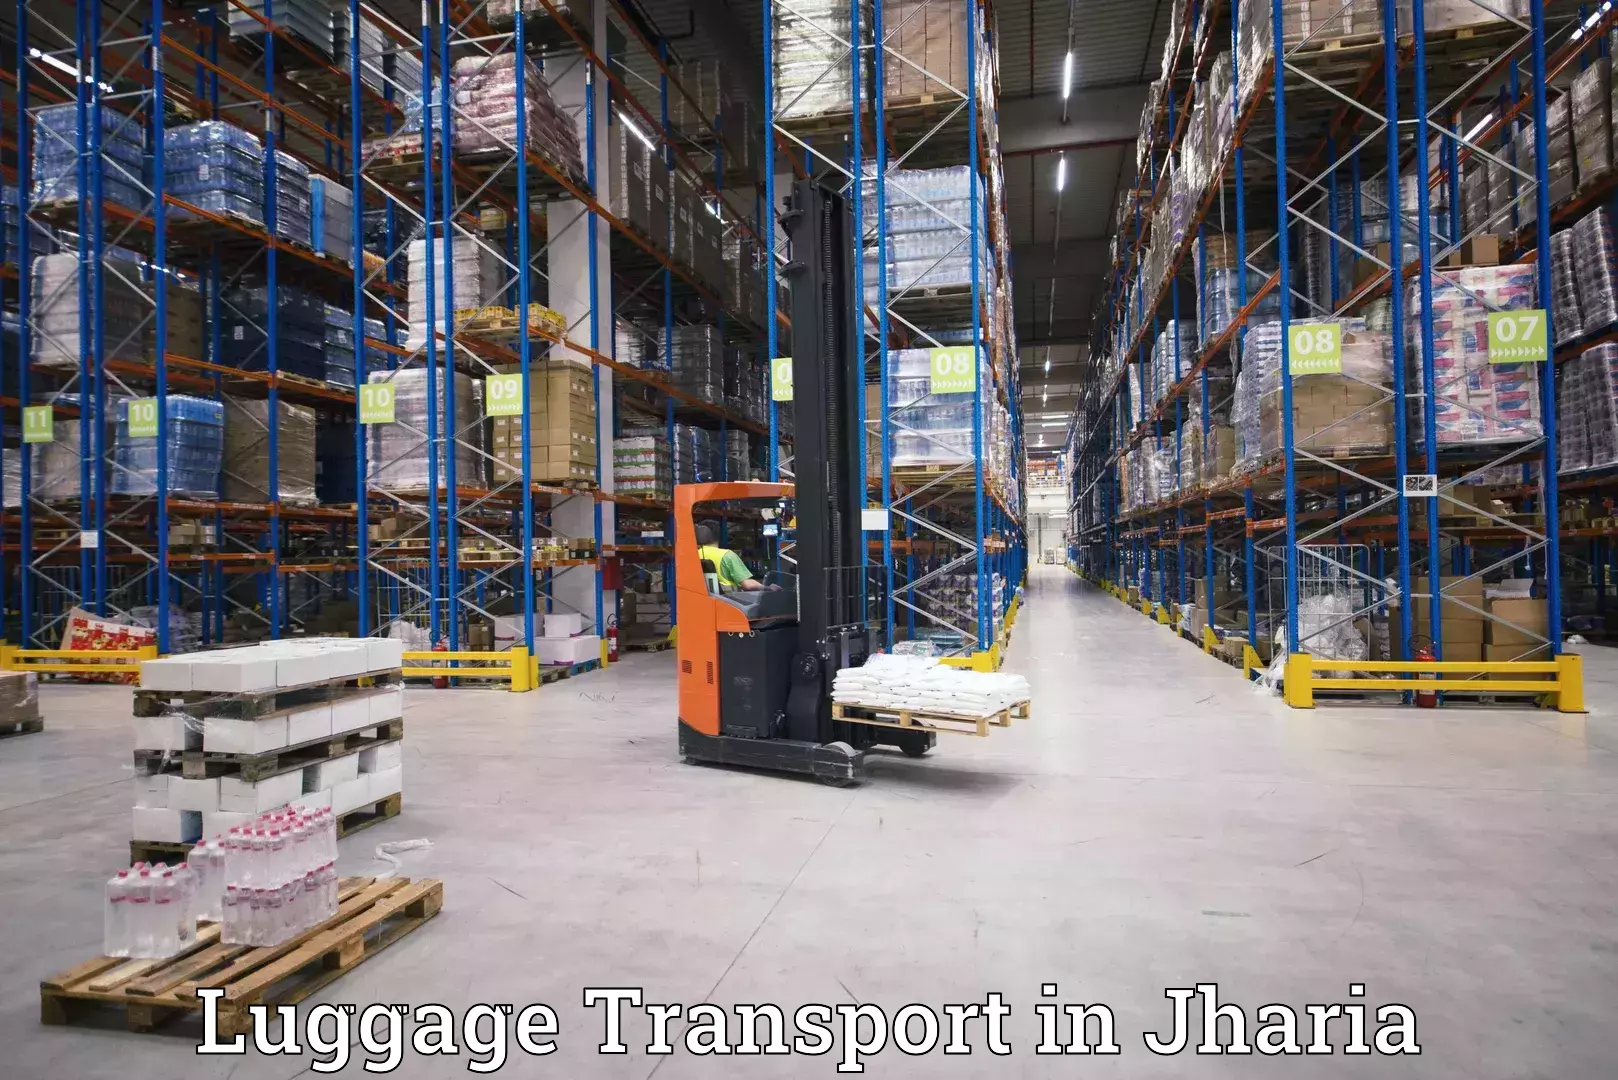 Luggage shipment strategy in Jharia